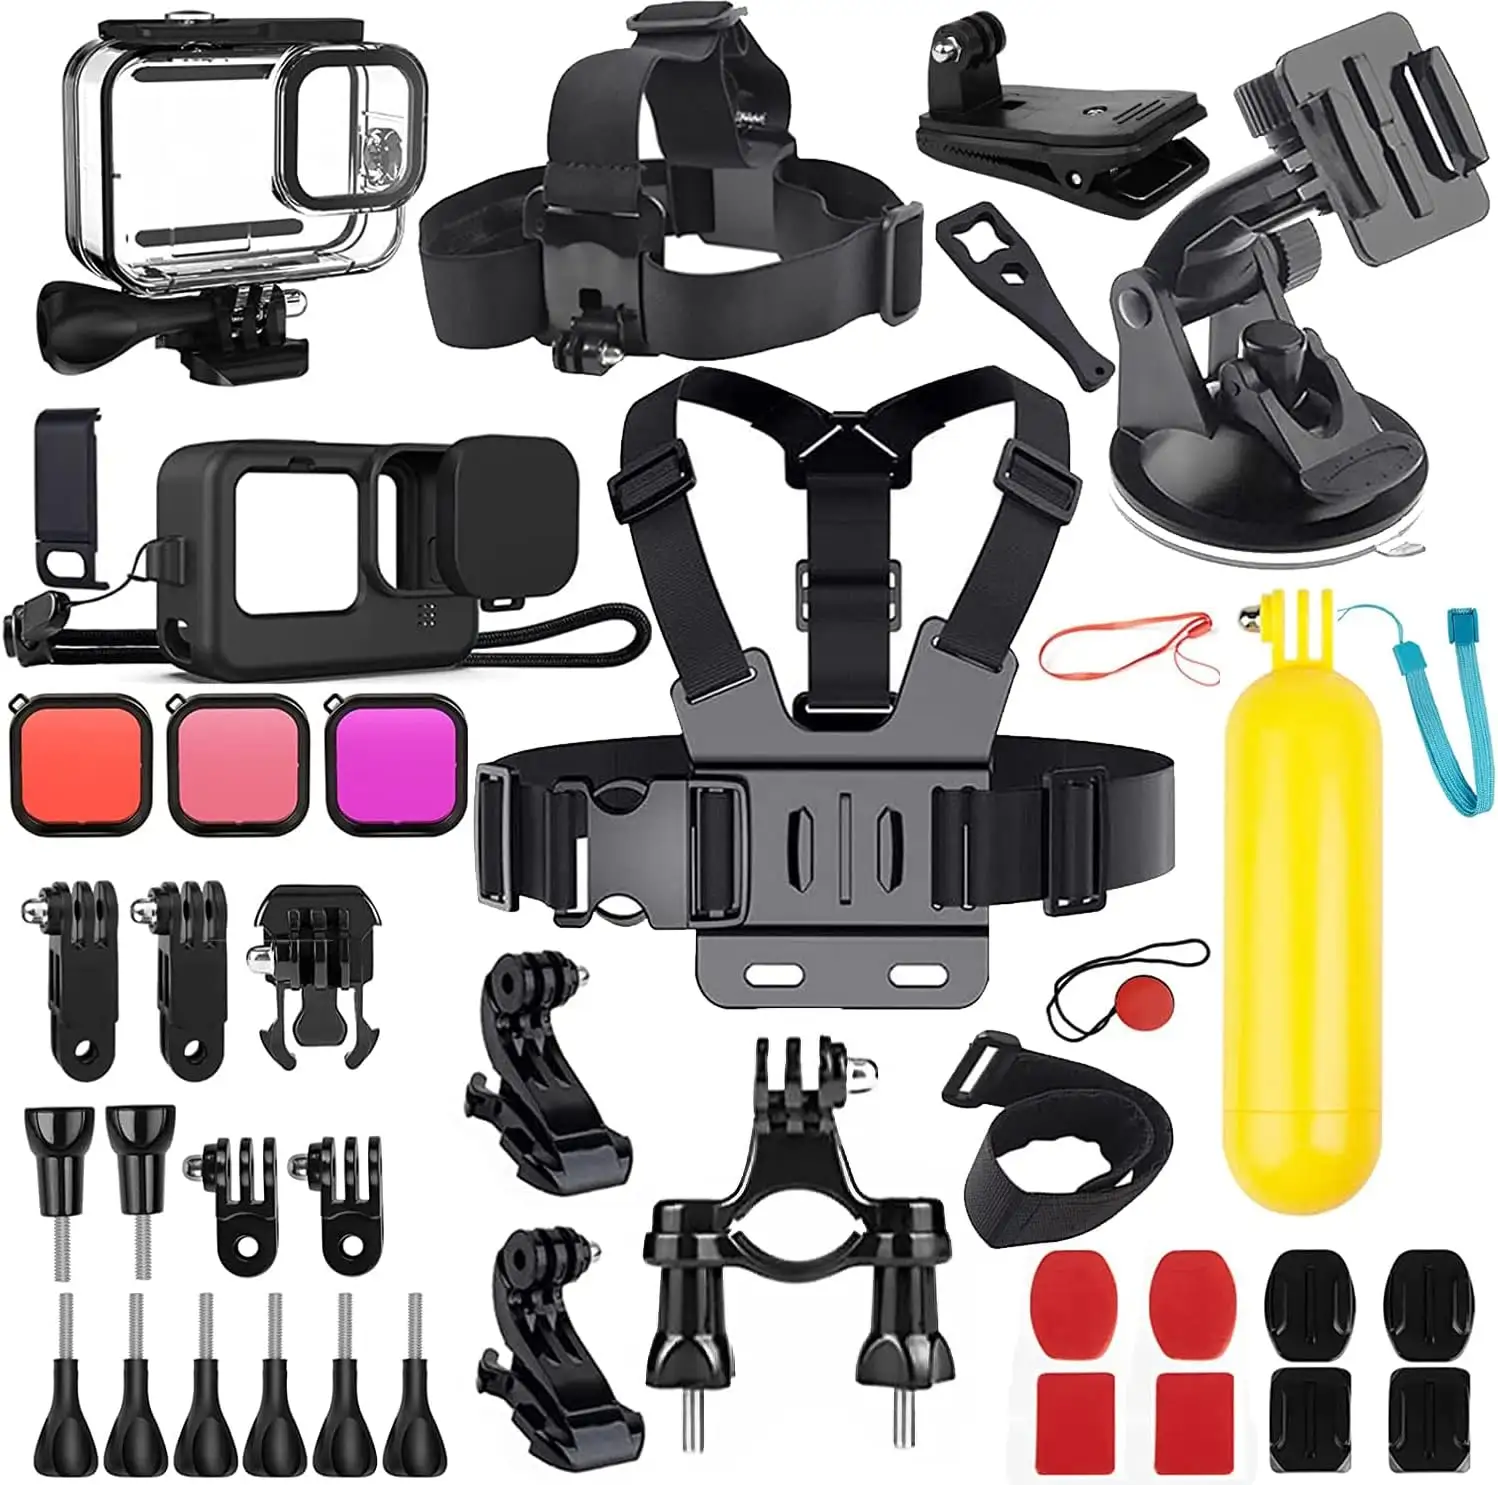 Popular Waterproof Housing Silicone Case Suction Cup Bike Mount Travel Accessories Kit Bag For GoPro Hero 12 11 10 9 Black